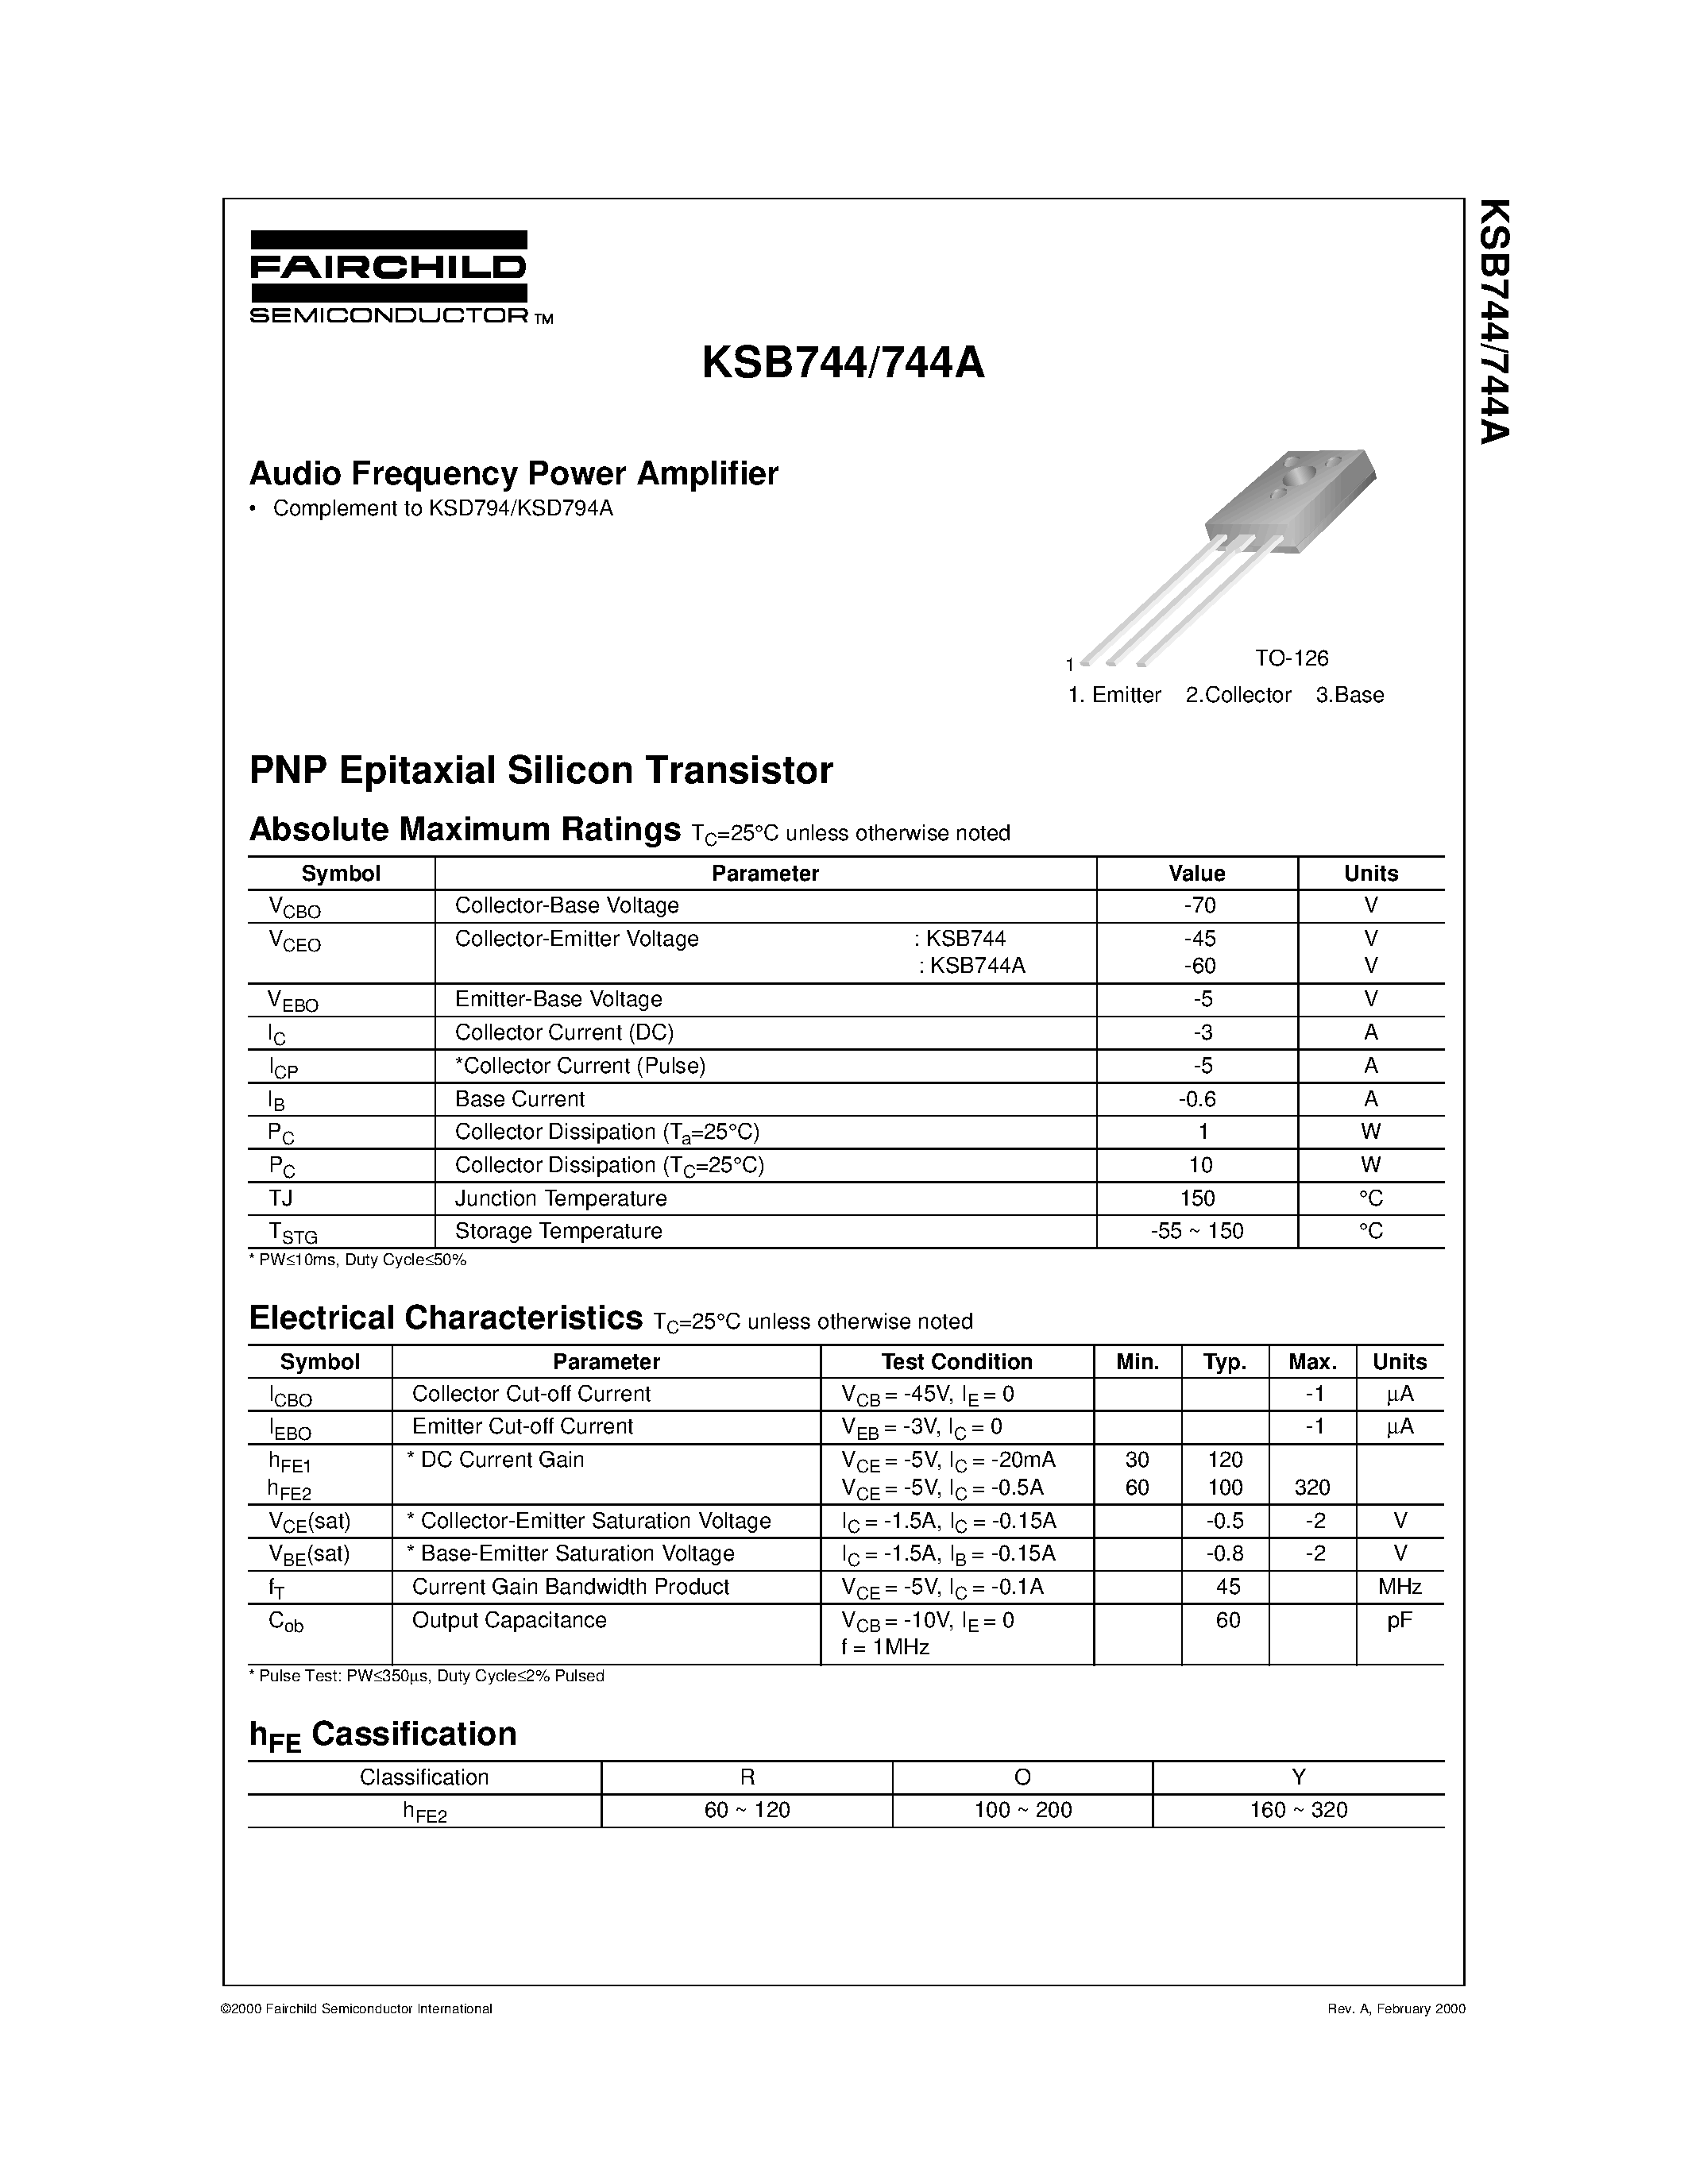 Datasheet KSB744A - Audio Frequency Power Amplifier page 1